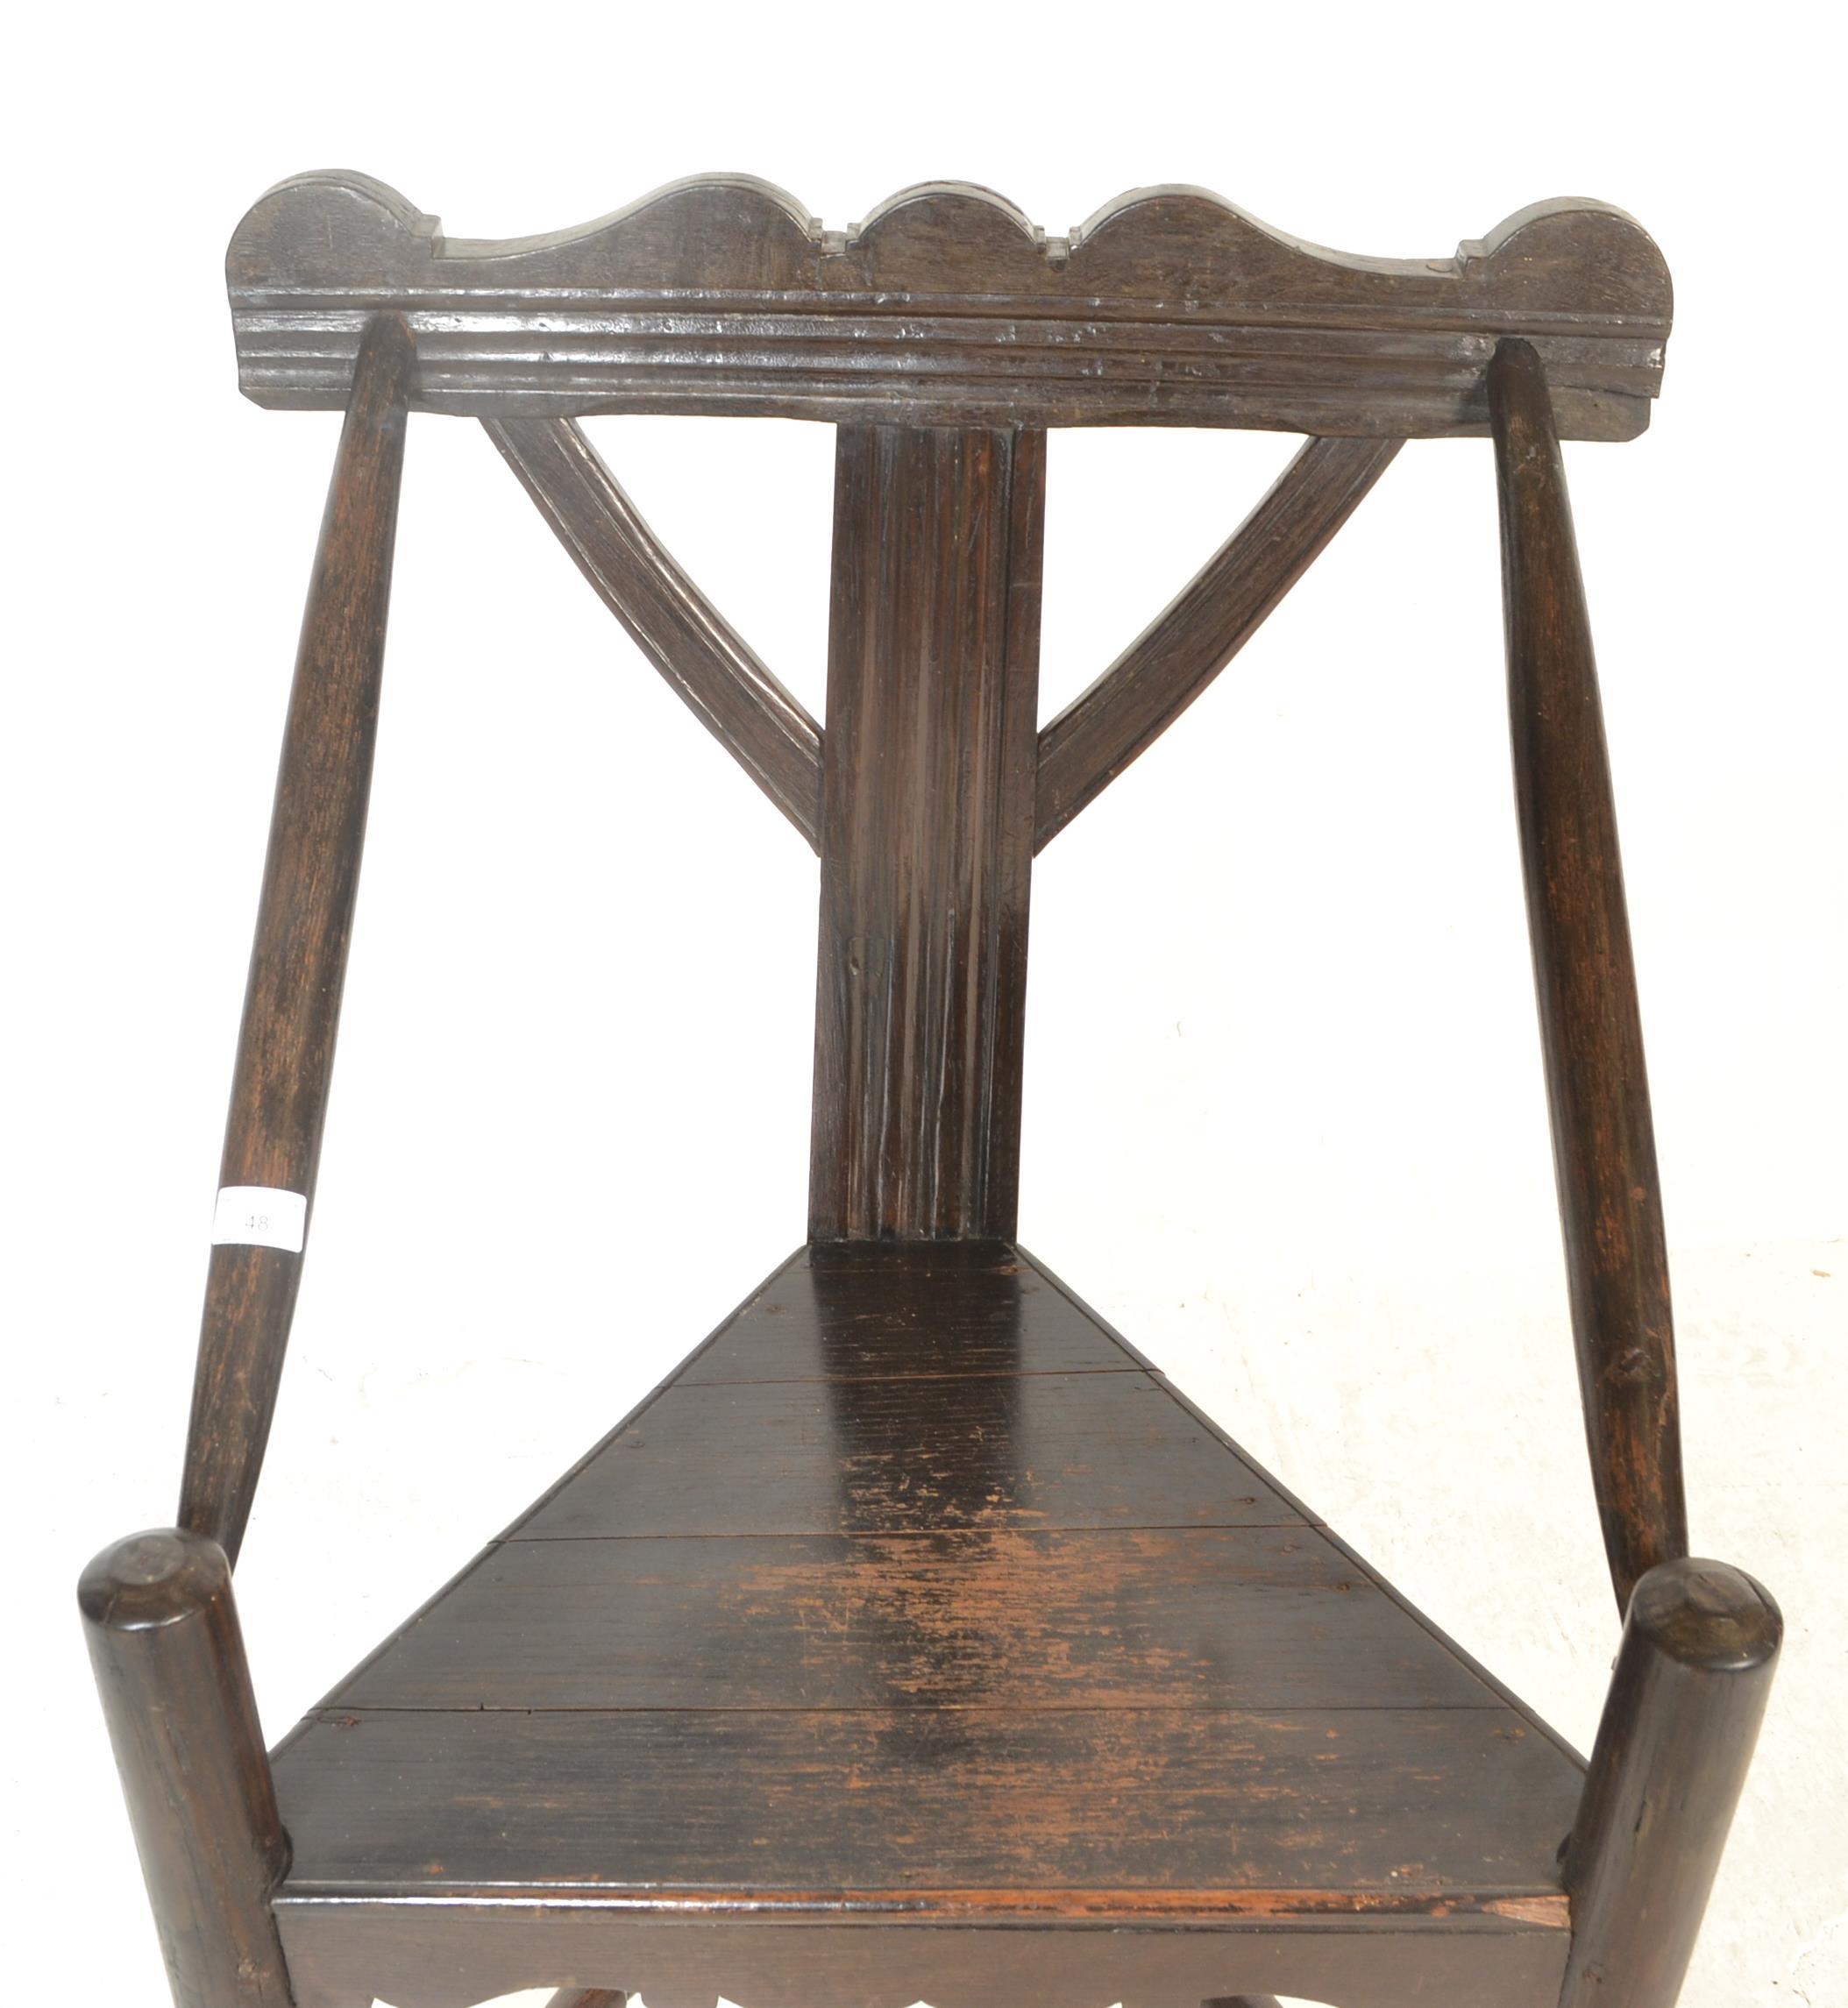 EARLY 19TH CENTURY OAK SCOTTISH TURNERS CHAIR - Image 7 of 8